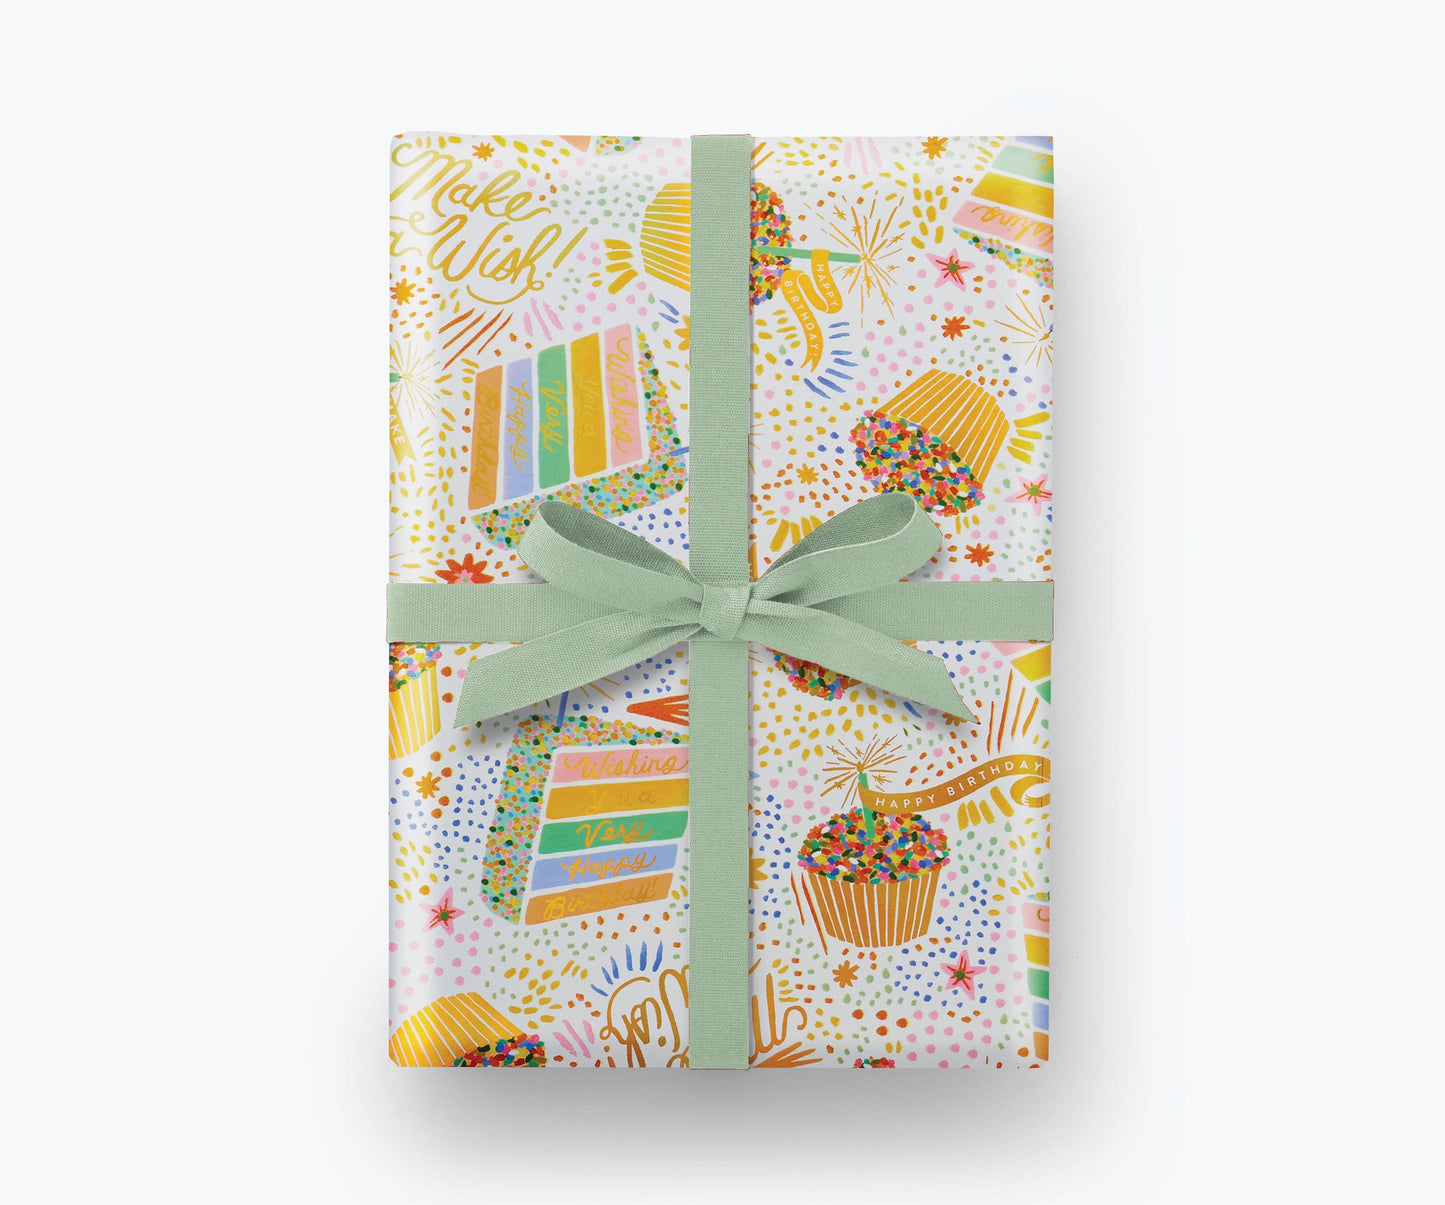 Birthday Cake Wrapping Paper shown with a blue bow. Illustration on wrapping paper features cupcakes and slices of colorful layer cake with lots of sprinkles. Multiple areas of text read "Make a WIsh!" and "Wishing you a very Happy Birthday" in gold script.